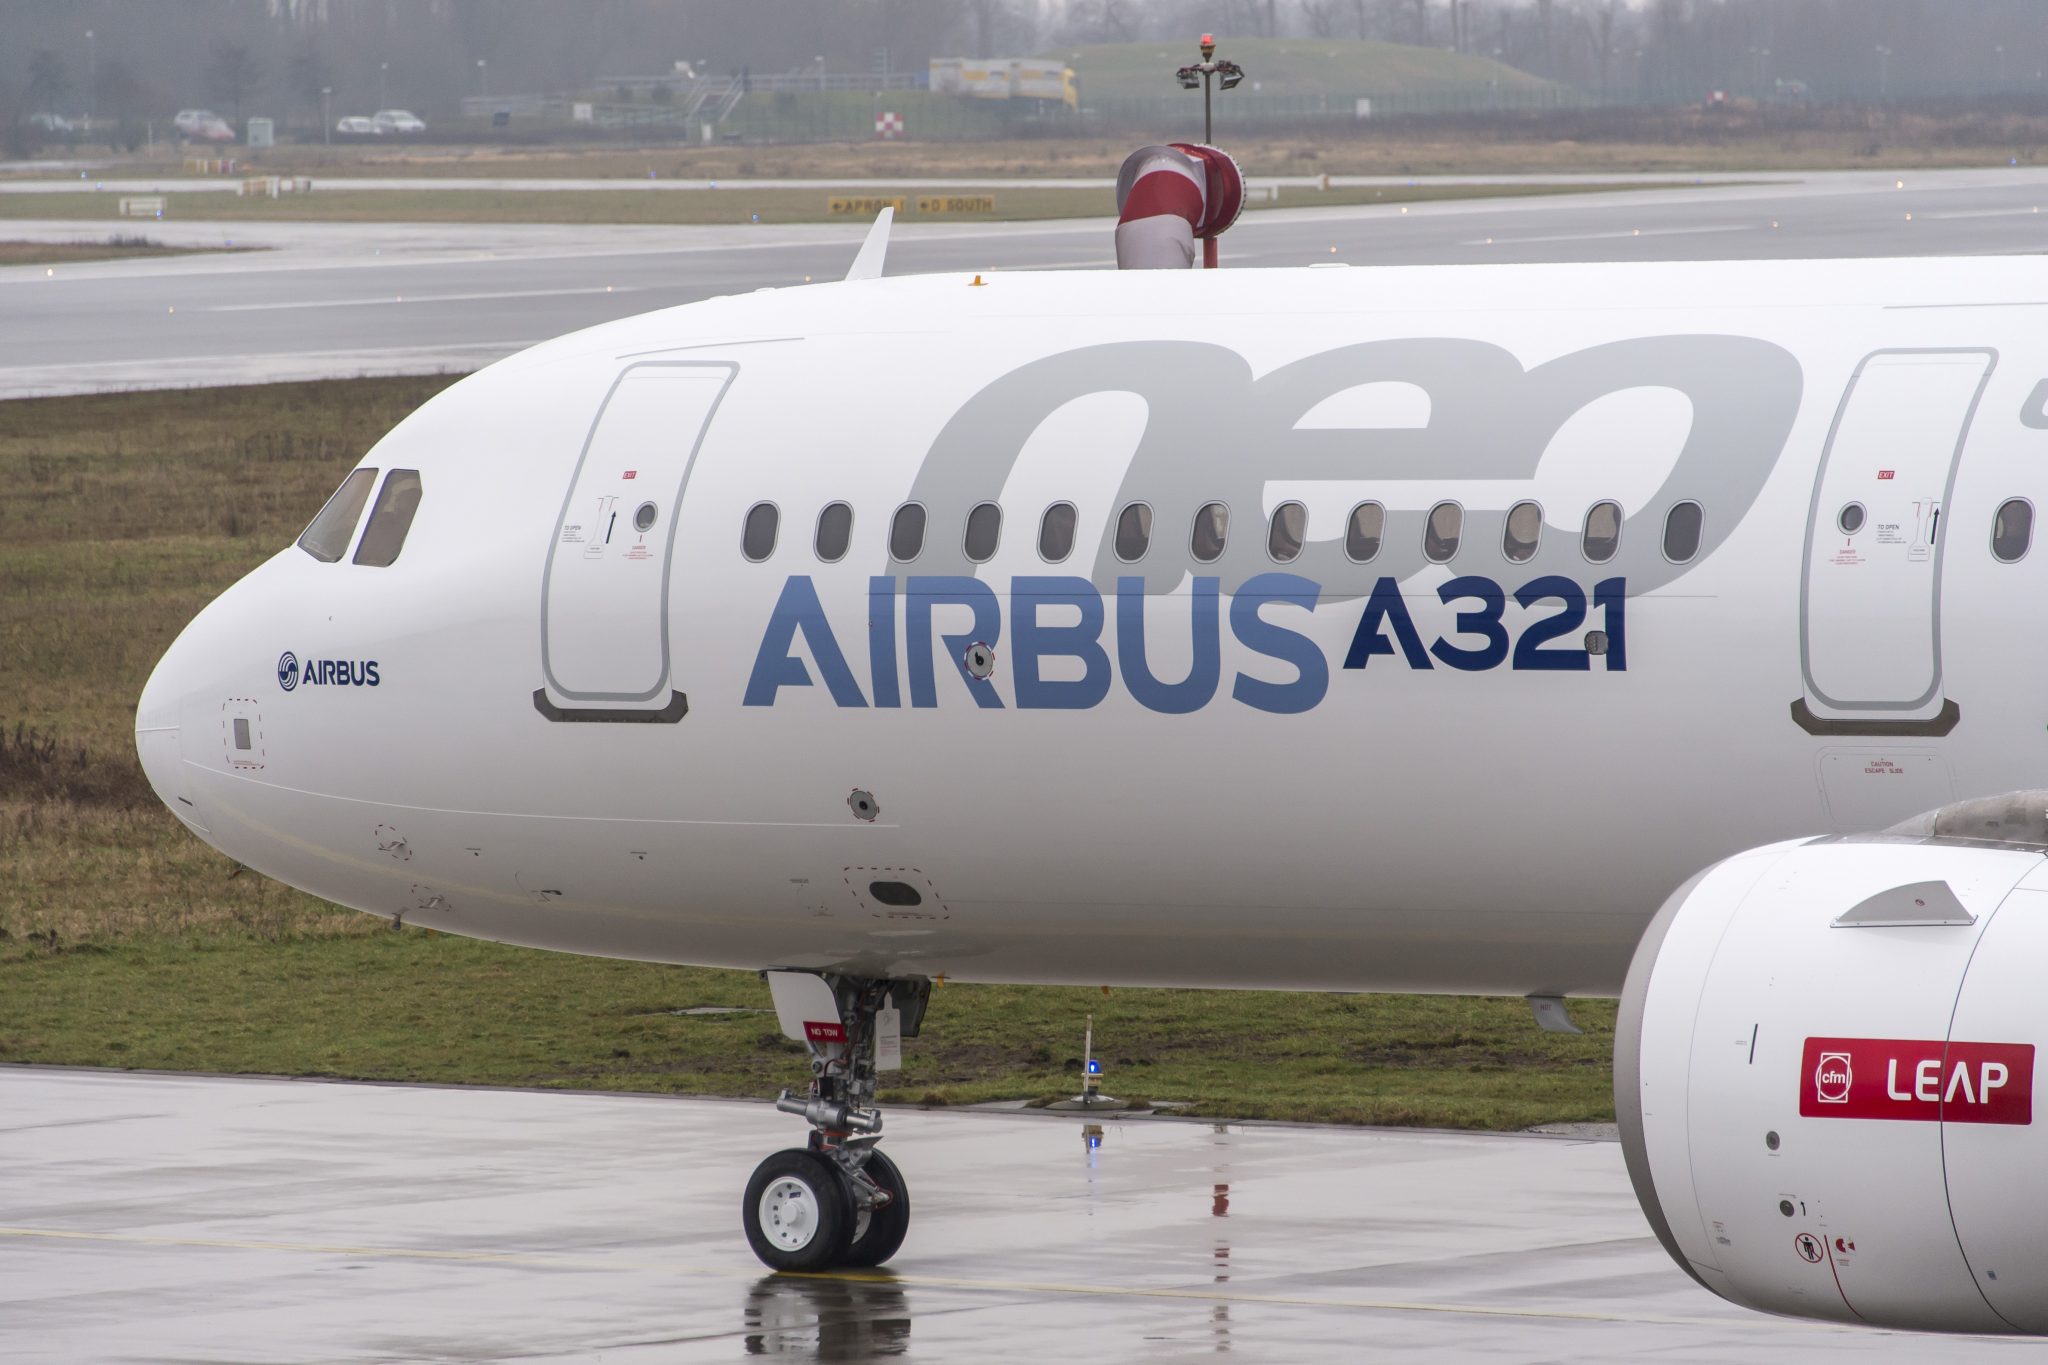 CALC to add two Airbus A321-200 in its fleet through purchase-and-leaseback